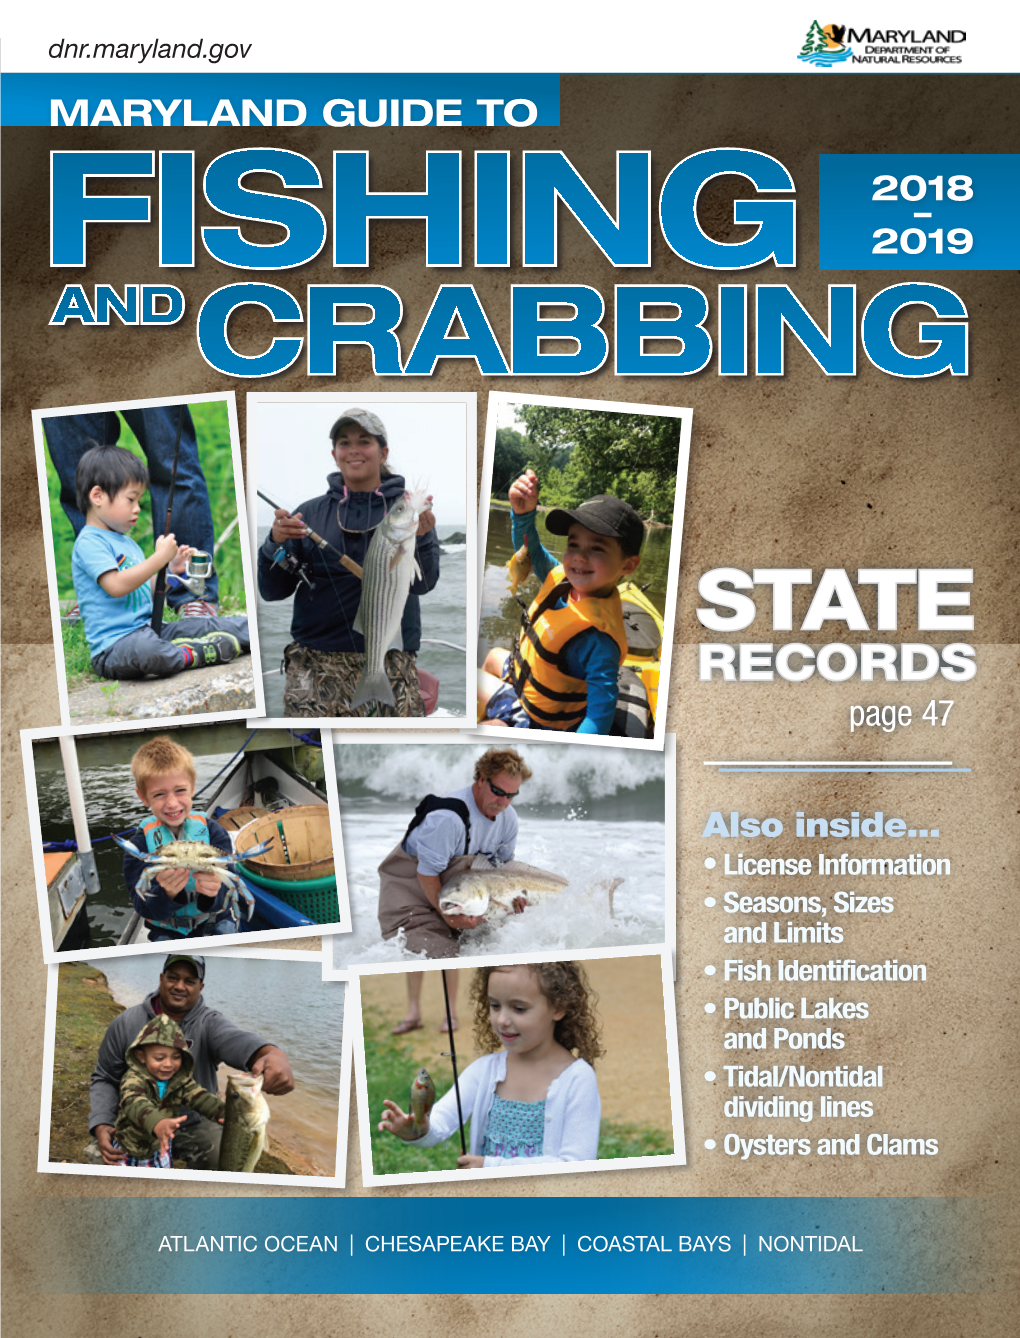 Maryland Guide to Fishing and Crabbing